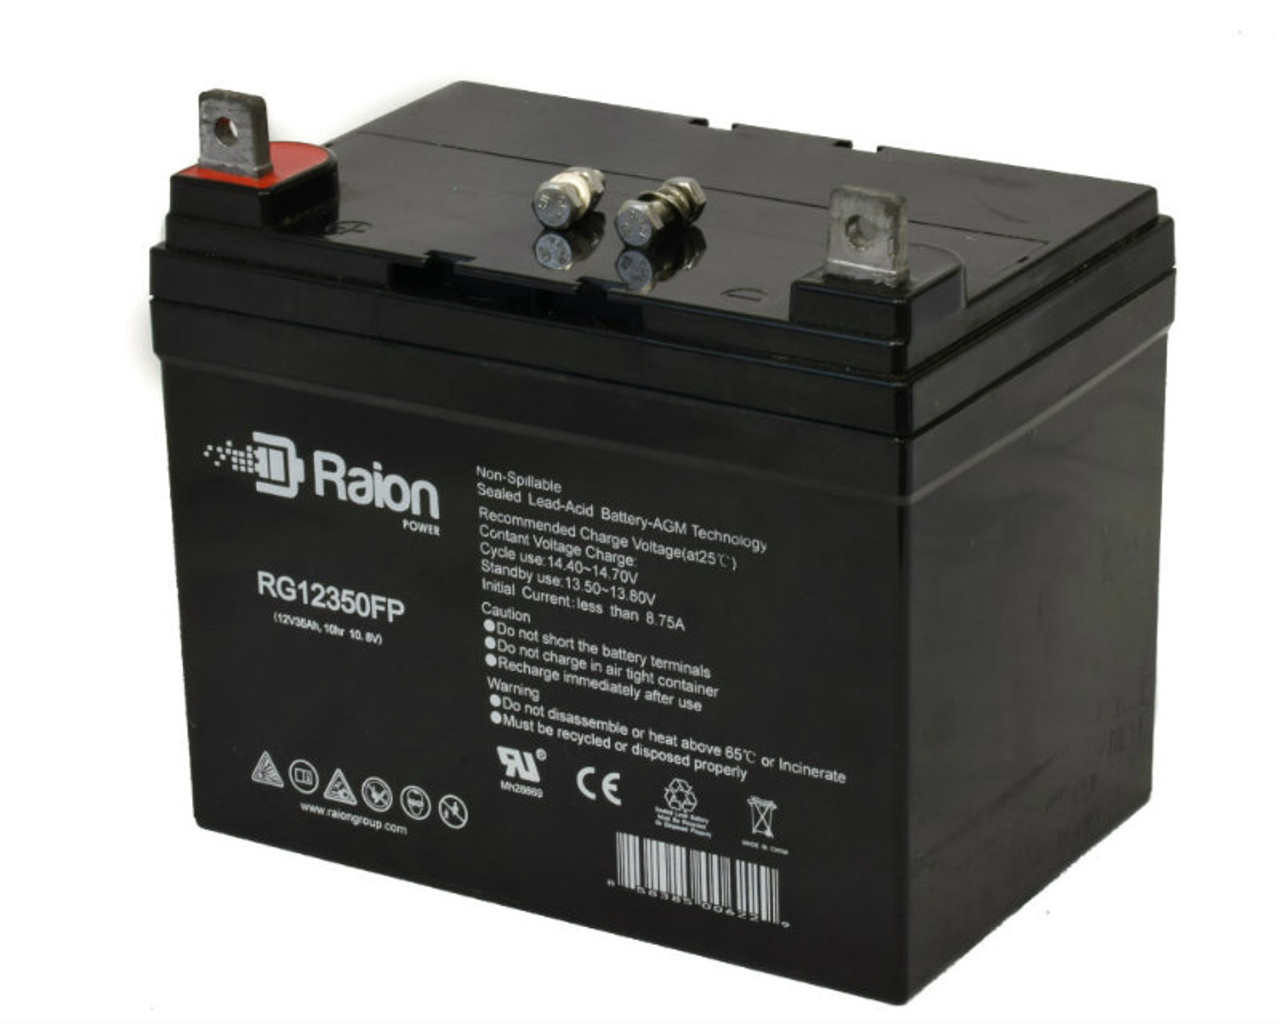 Raion Power Replacement 12V 35Ah RG12350FP Mobility Scooter Battery for Golden Technologies Companion GC222